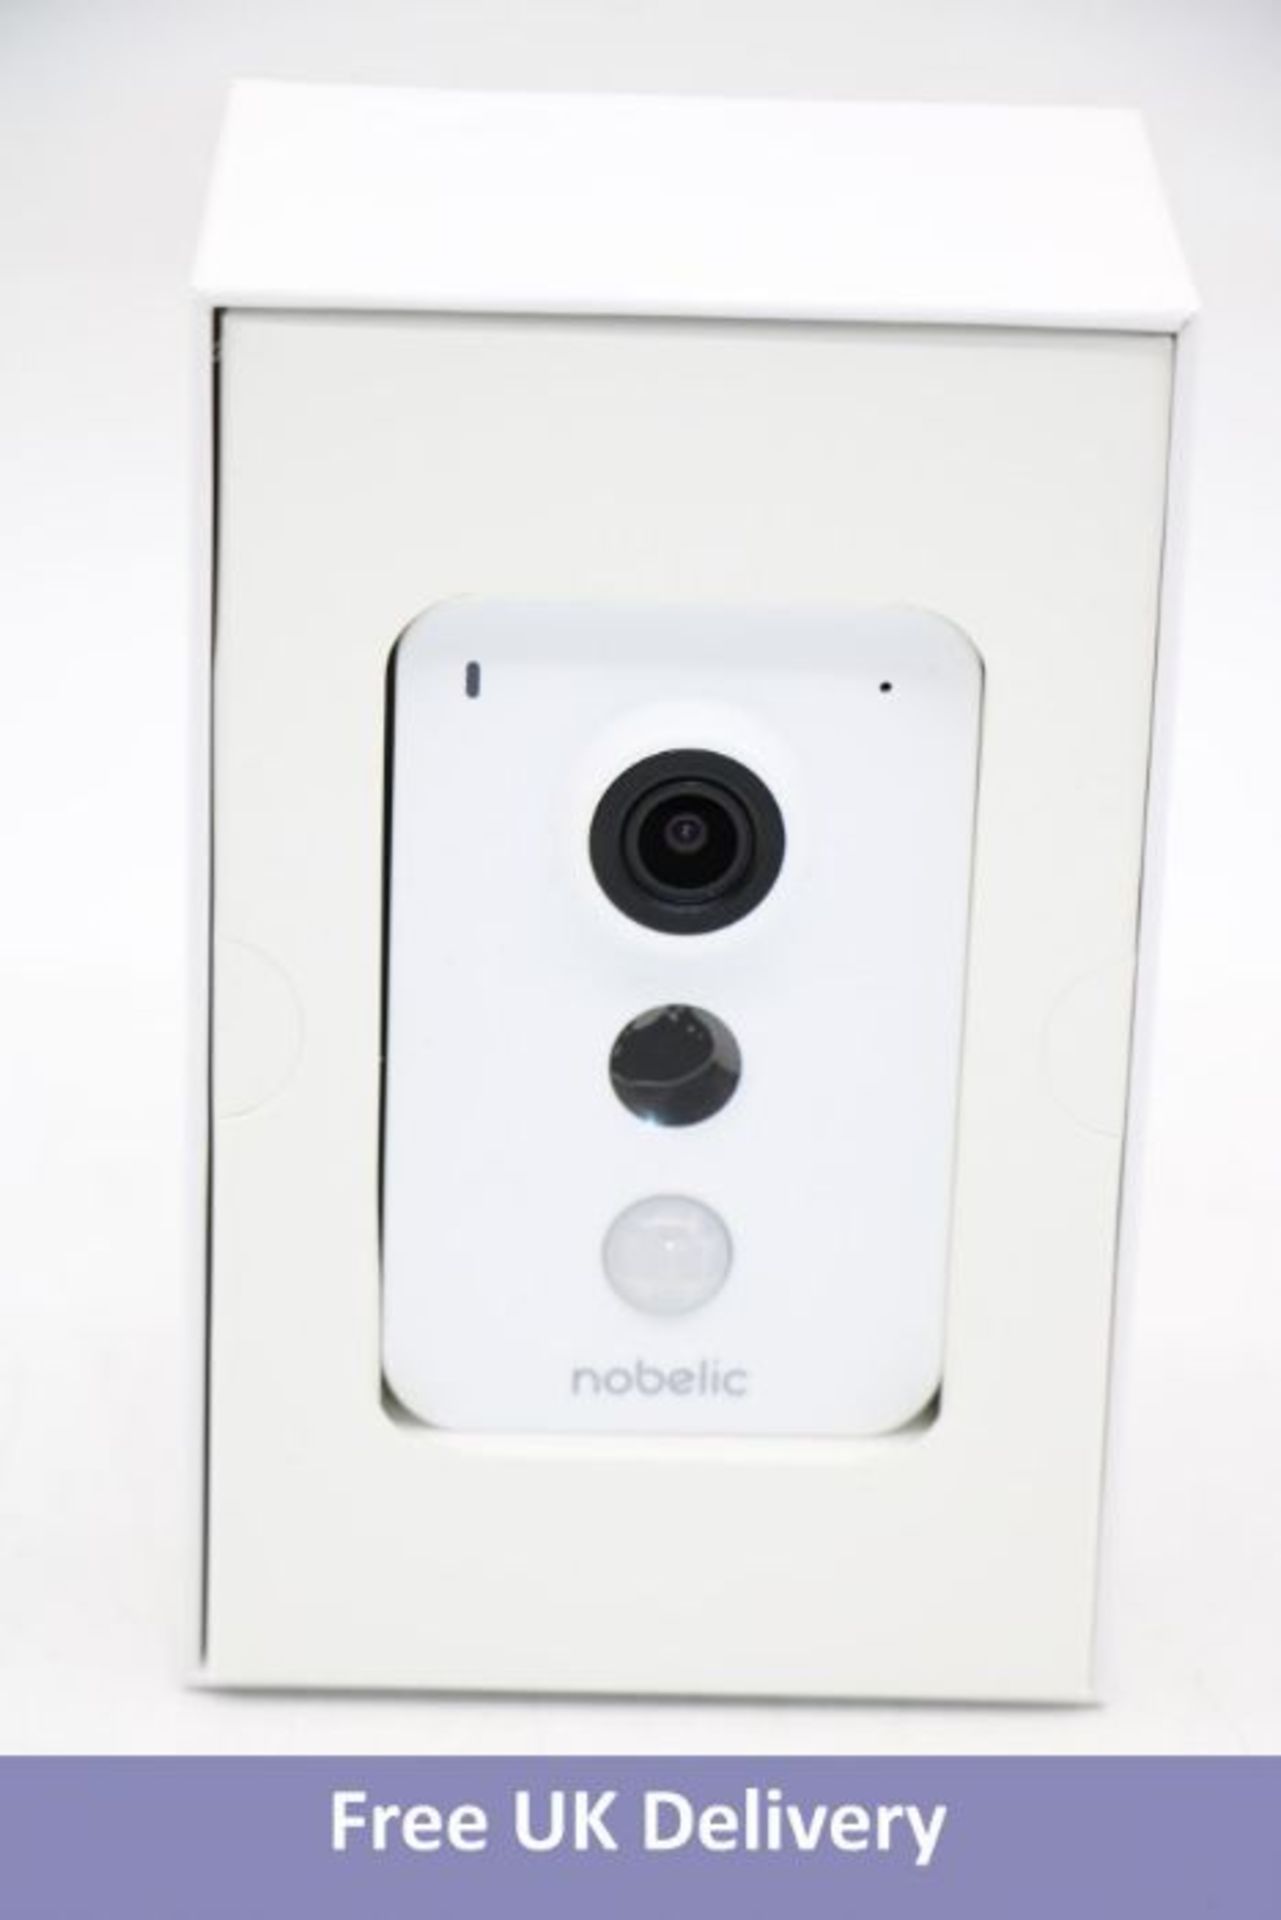 Seven Dahua 4 MP IP Camera Imou Cube DH-IPC-K42AP, Built-in Microphone and Speaker - Image 5 of 7